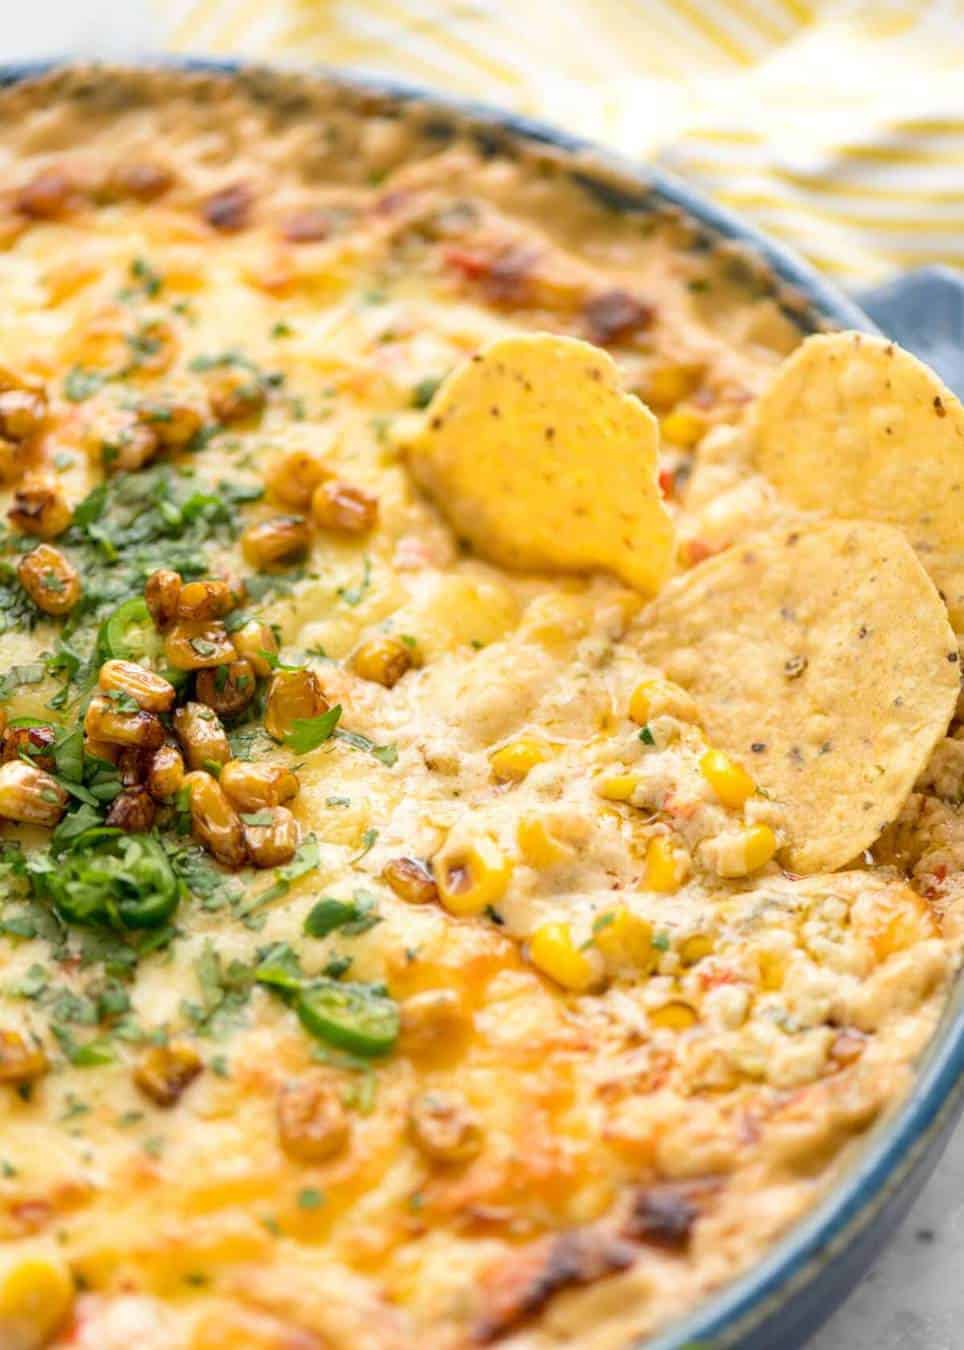 Essential Super Bowl food - a big batch Hot Corn Dip that's made for eating with eyes glued to the TV screen.